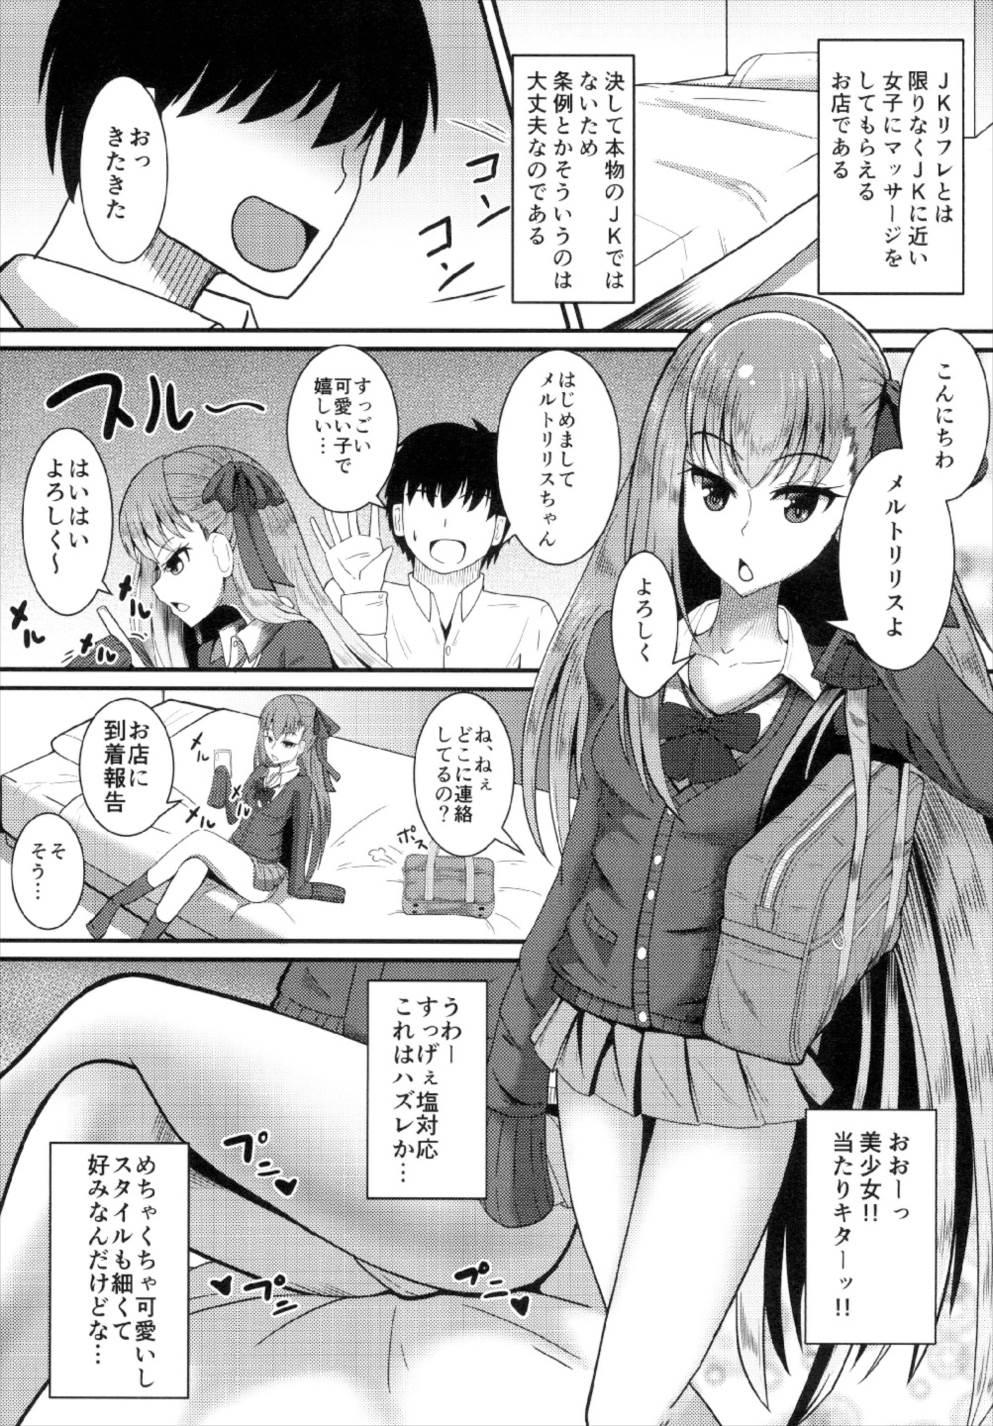 Submissive Chaldea JK Collection Vol. 2 Meltlilith - Fate grand order Pussy Orgasm - Page 3